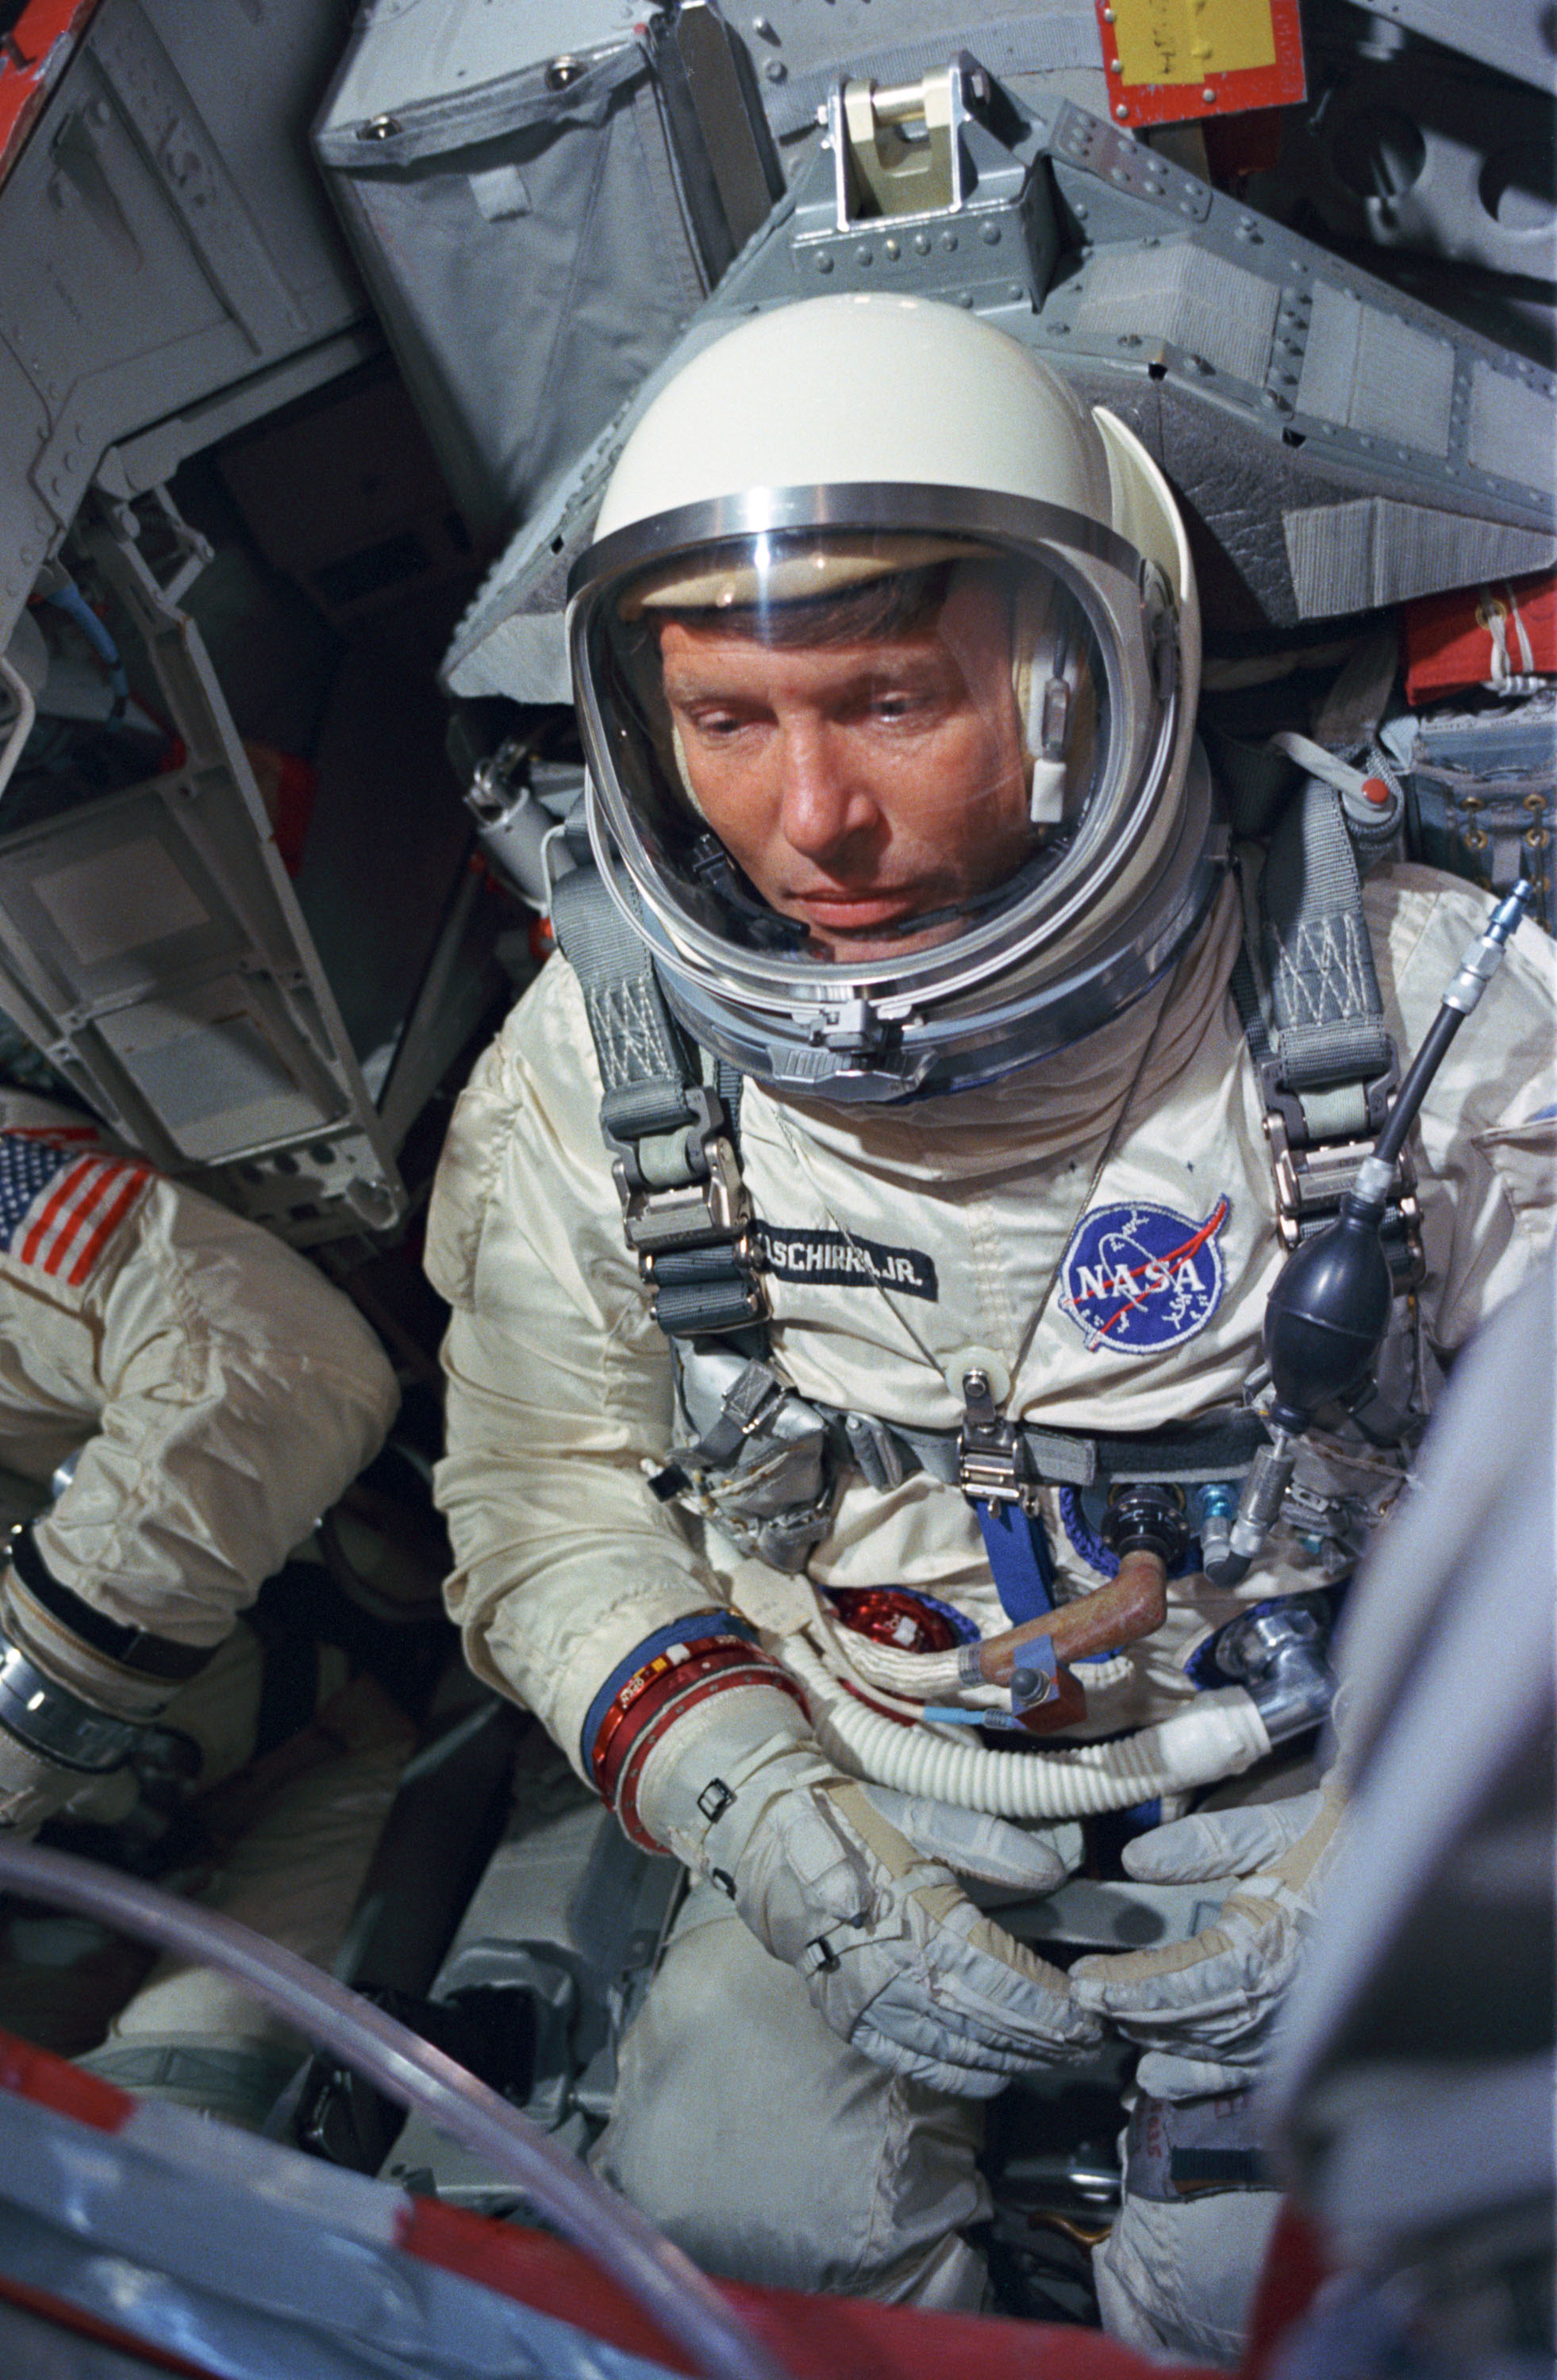 Astronaut Wally Schirra during a simulated flight test activity